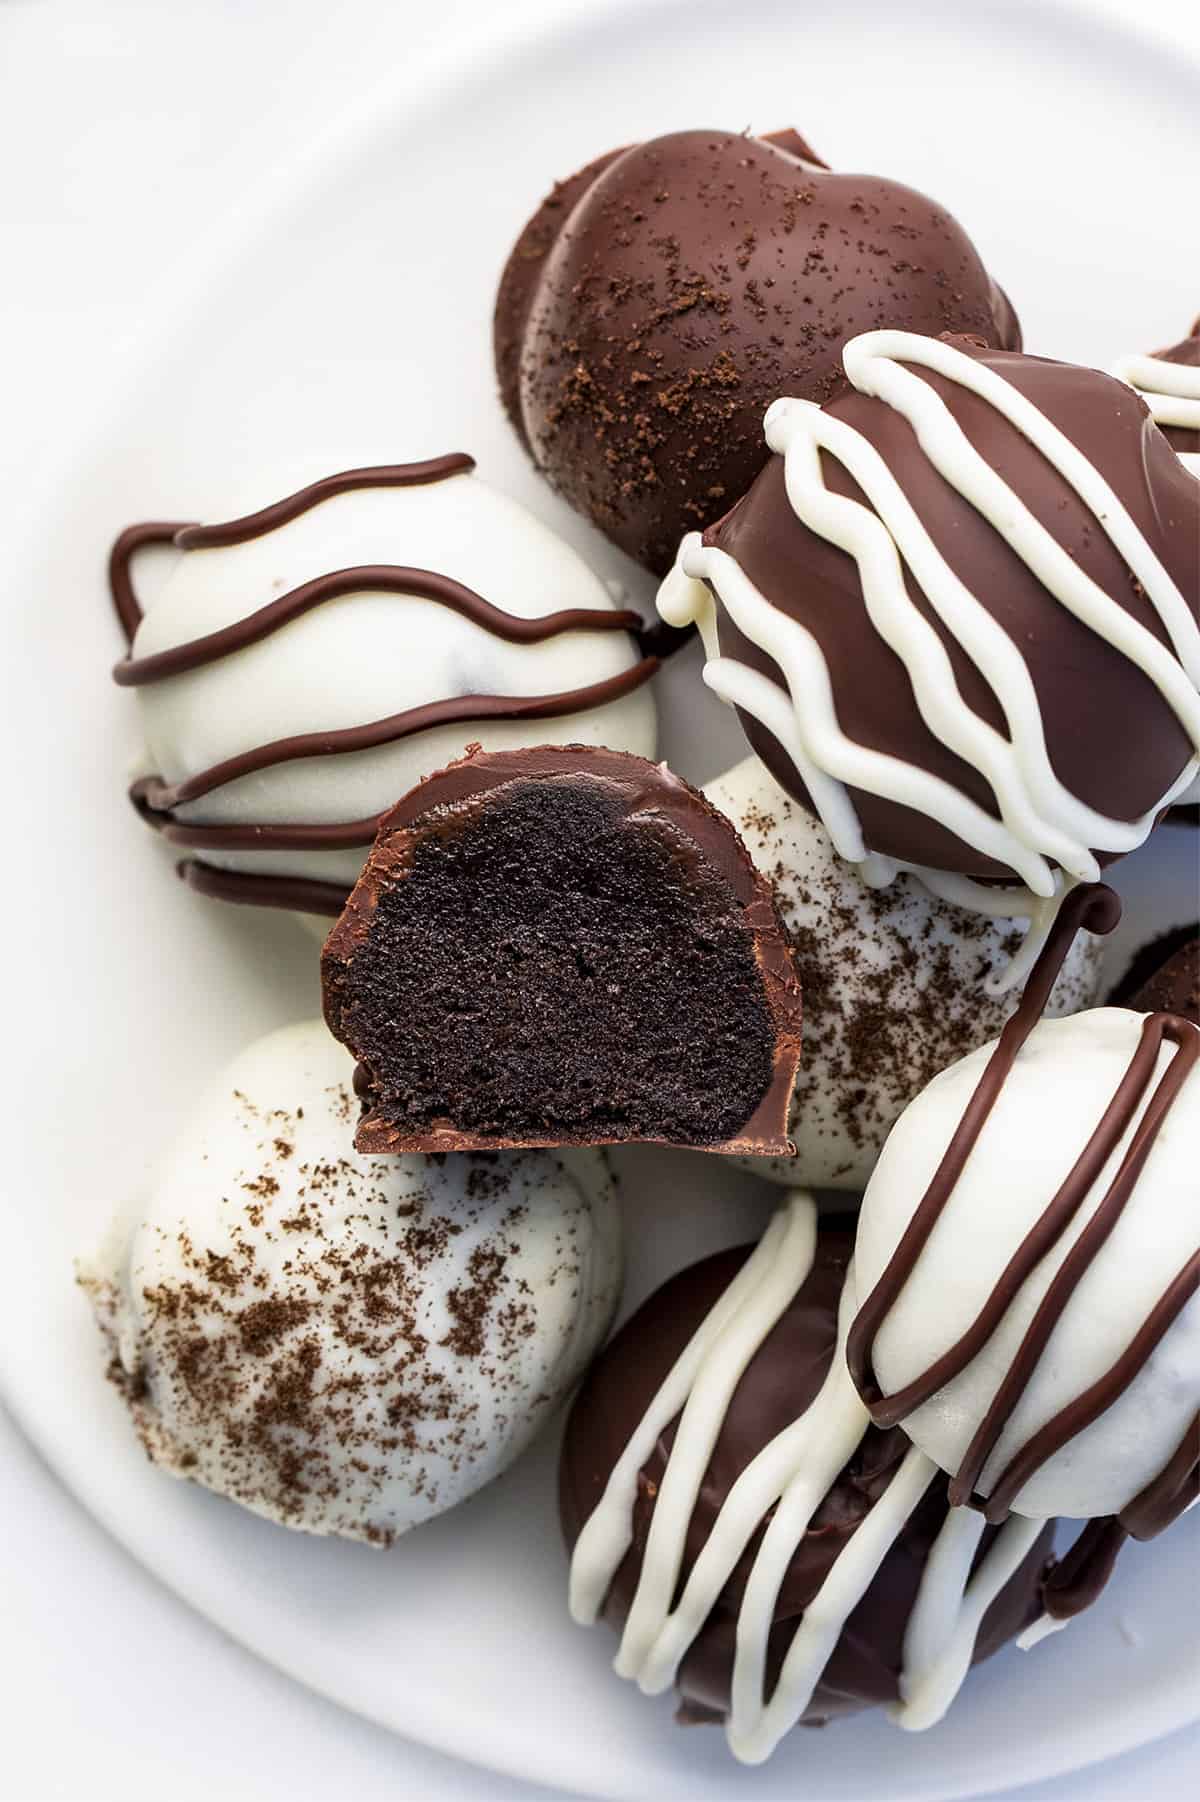 Plate of Easy Oreo Truffles with Dark and White Chocolate and One Cut in Half